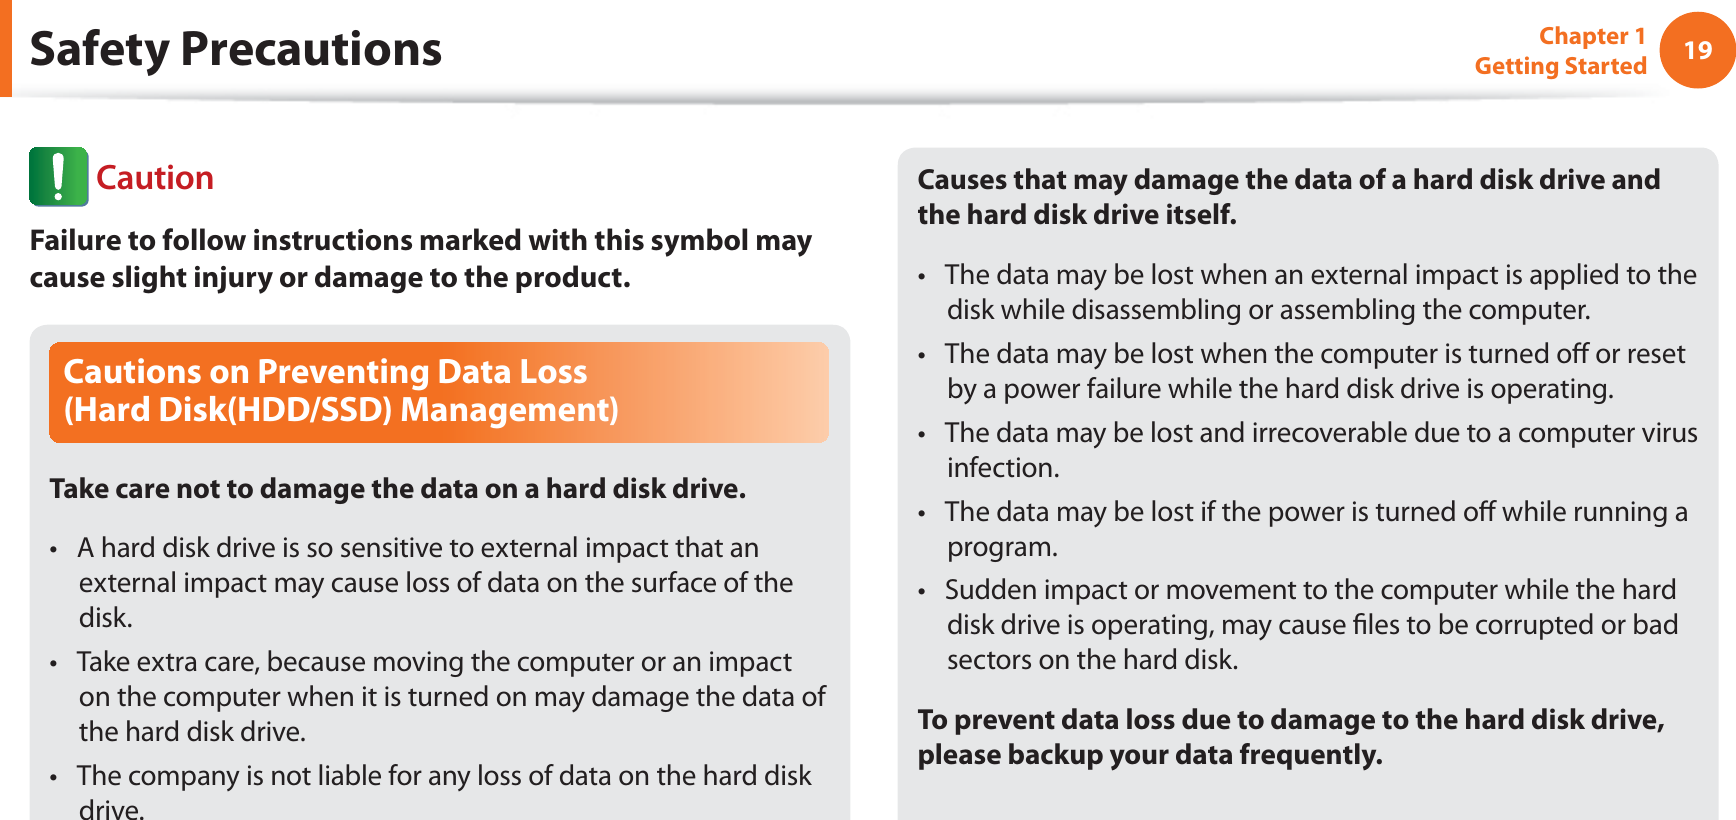 19Chapter 1 Getting StartedSafety PrecautionsCautions on Preventing Data Loss  (Hard Disk(HDD/SSD) Management)Take care not to damage the data on a hard disk drive.A hard disk drive is so sensitive to external impact that an t external impact may cause loss of data on the surface of the disk.Take extra care, because moving the computer or an impact t on the computer when it is turned on may damage the data of the hard disk drive.The company is not liable for any loss of data on the hard disk t drive.Causes that may damage the data of a hard disk drive and the hard disk drive itself.The data may be lost when an external impact is applied to the t disk while disassembling or assembling the computer.The data may be lost when the computer is turned o or reset t by a power failure while the hard disk drive is operating.The data may be lost and irrecoverable due to a computer virus t infection.The data may be lost if the power is turned o while running a t program.Sudden impact or movement to the computer while the hard t disk drive is operating, may cause les to be corrupted or bad sectors on the hard disk.To prevent data loss due to damage to the hard disk drive, please backup your data frequently. CautionFailure to follow instructions marked with this symbol may cause slight injury or damage to the product.